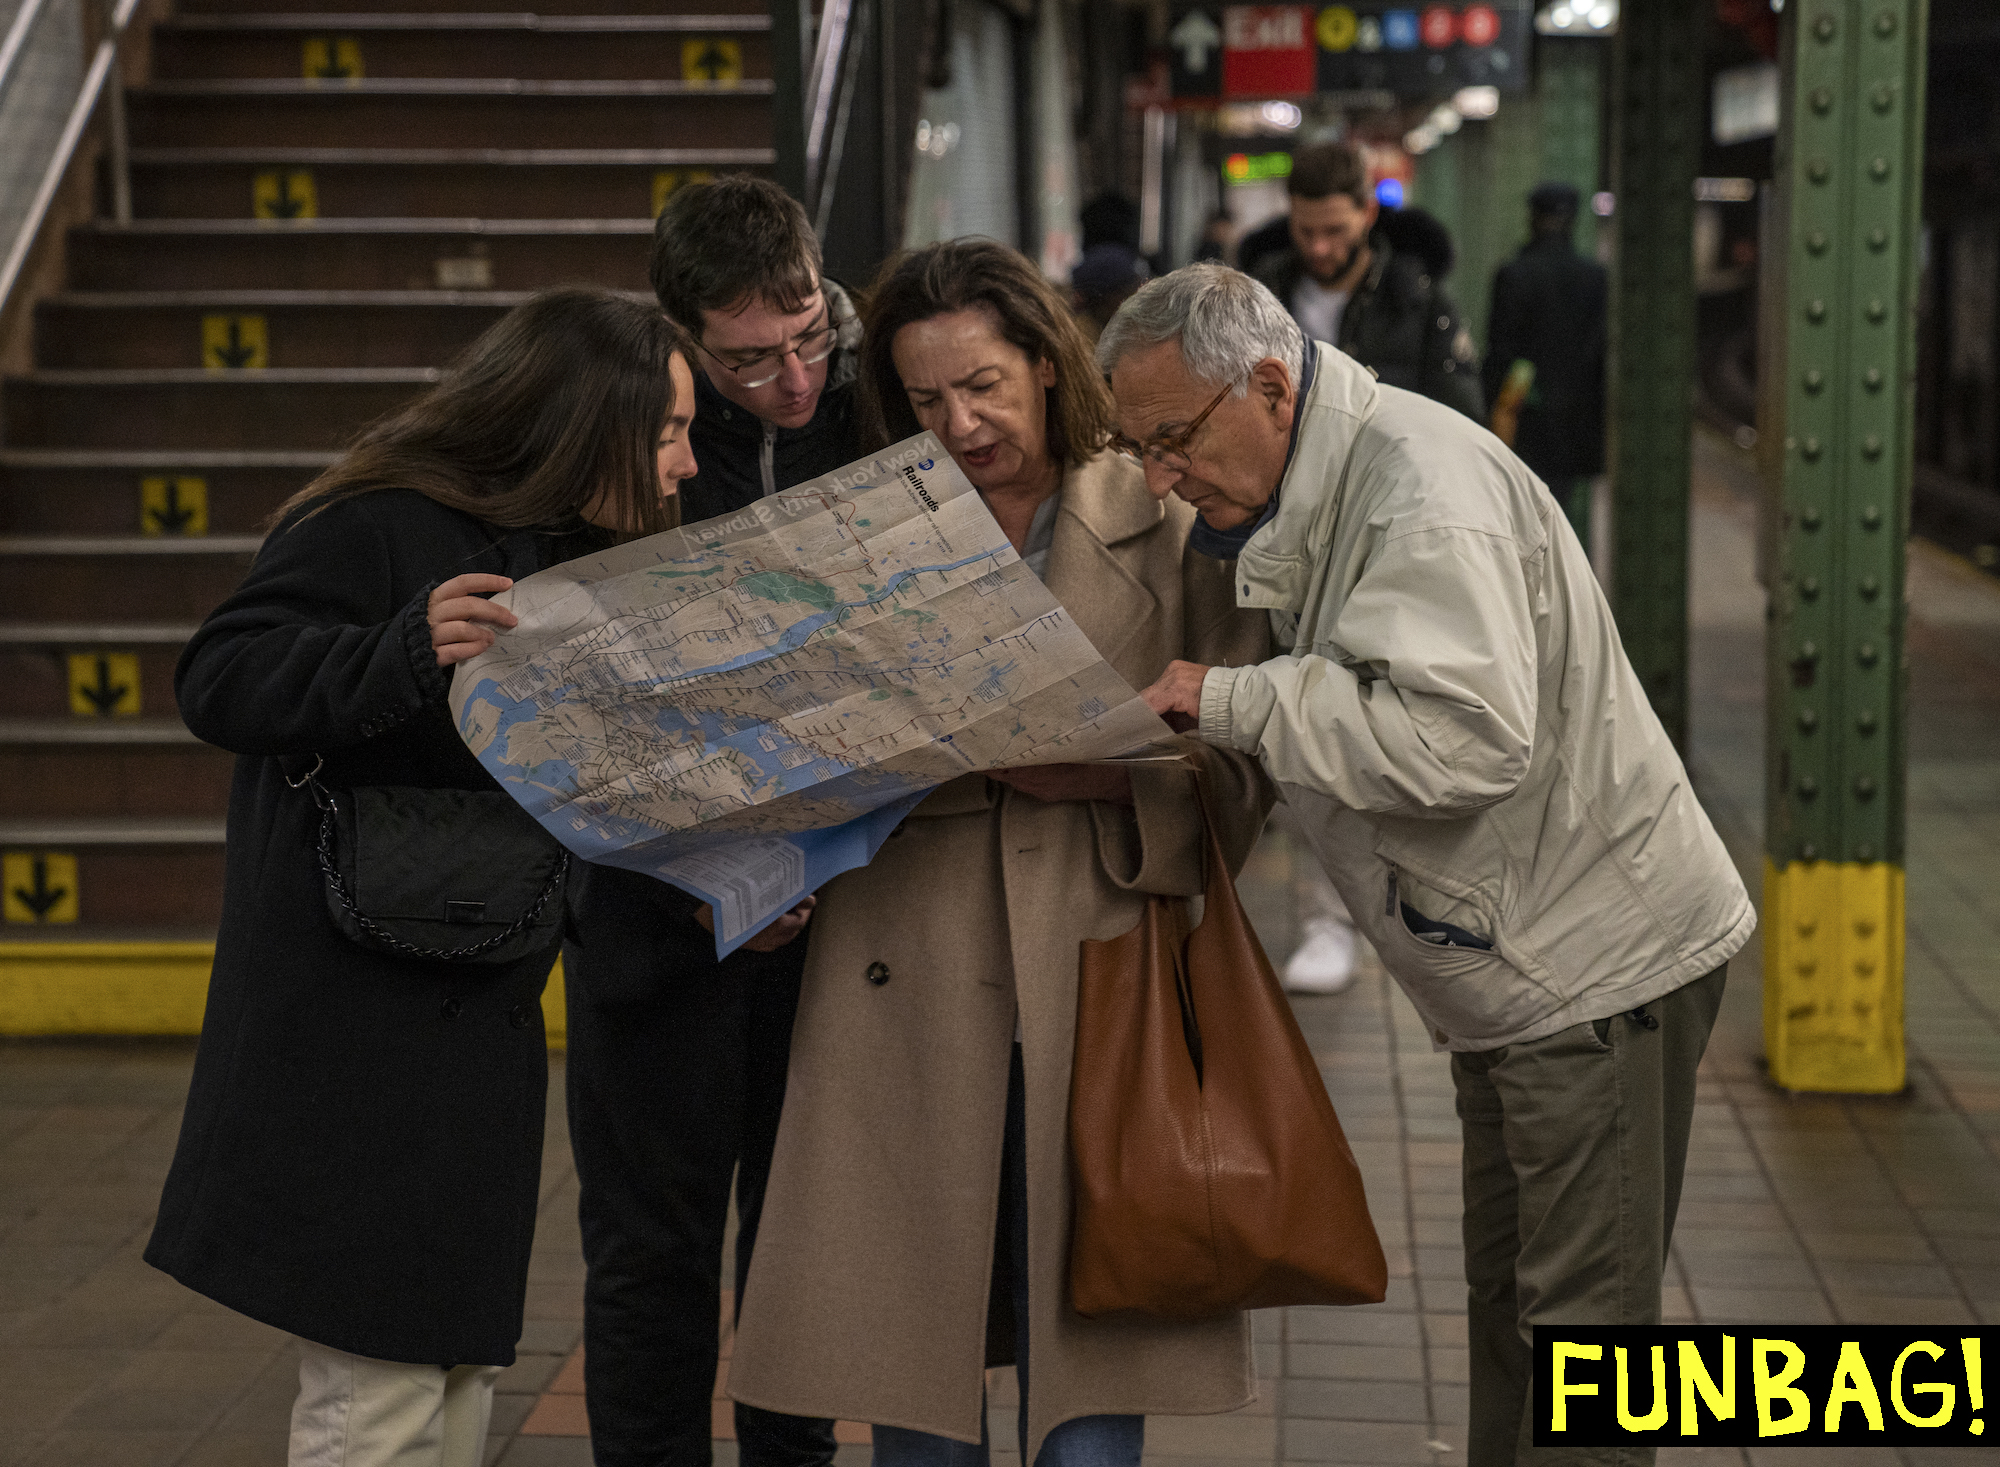 NEW YORK, NY - APRIL 3: Out of town tourists check a subway map on April 3, 2023 in New York City. Officials in New York City expect 61 million tourists to visit in 2023, an increase of 9% over 2022 figures of 56.4 million. (Photo by Robert Nickelsberg/Getty Images)